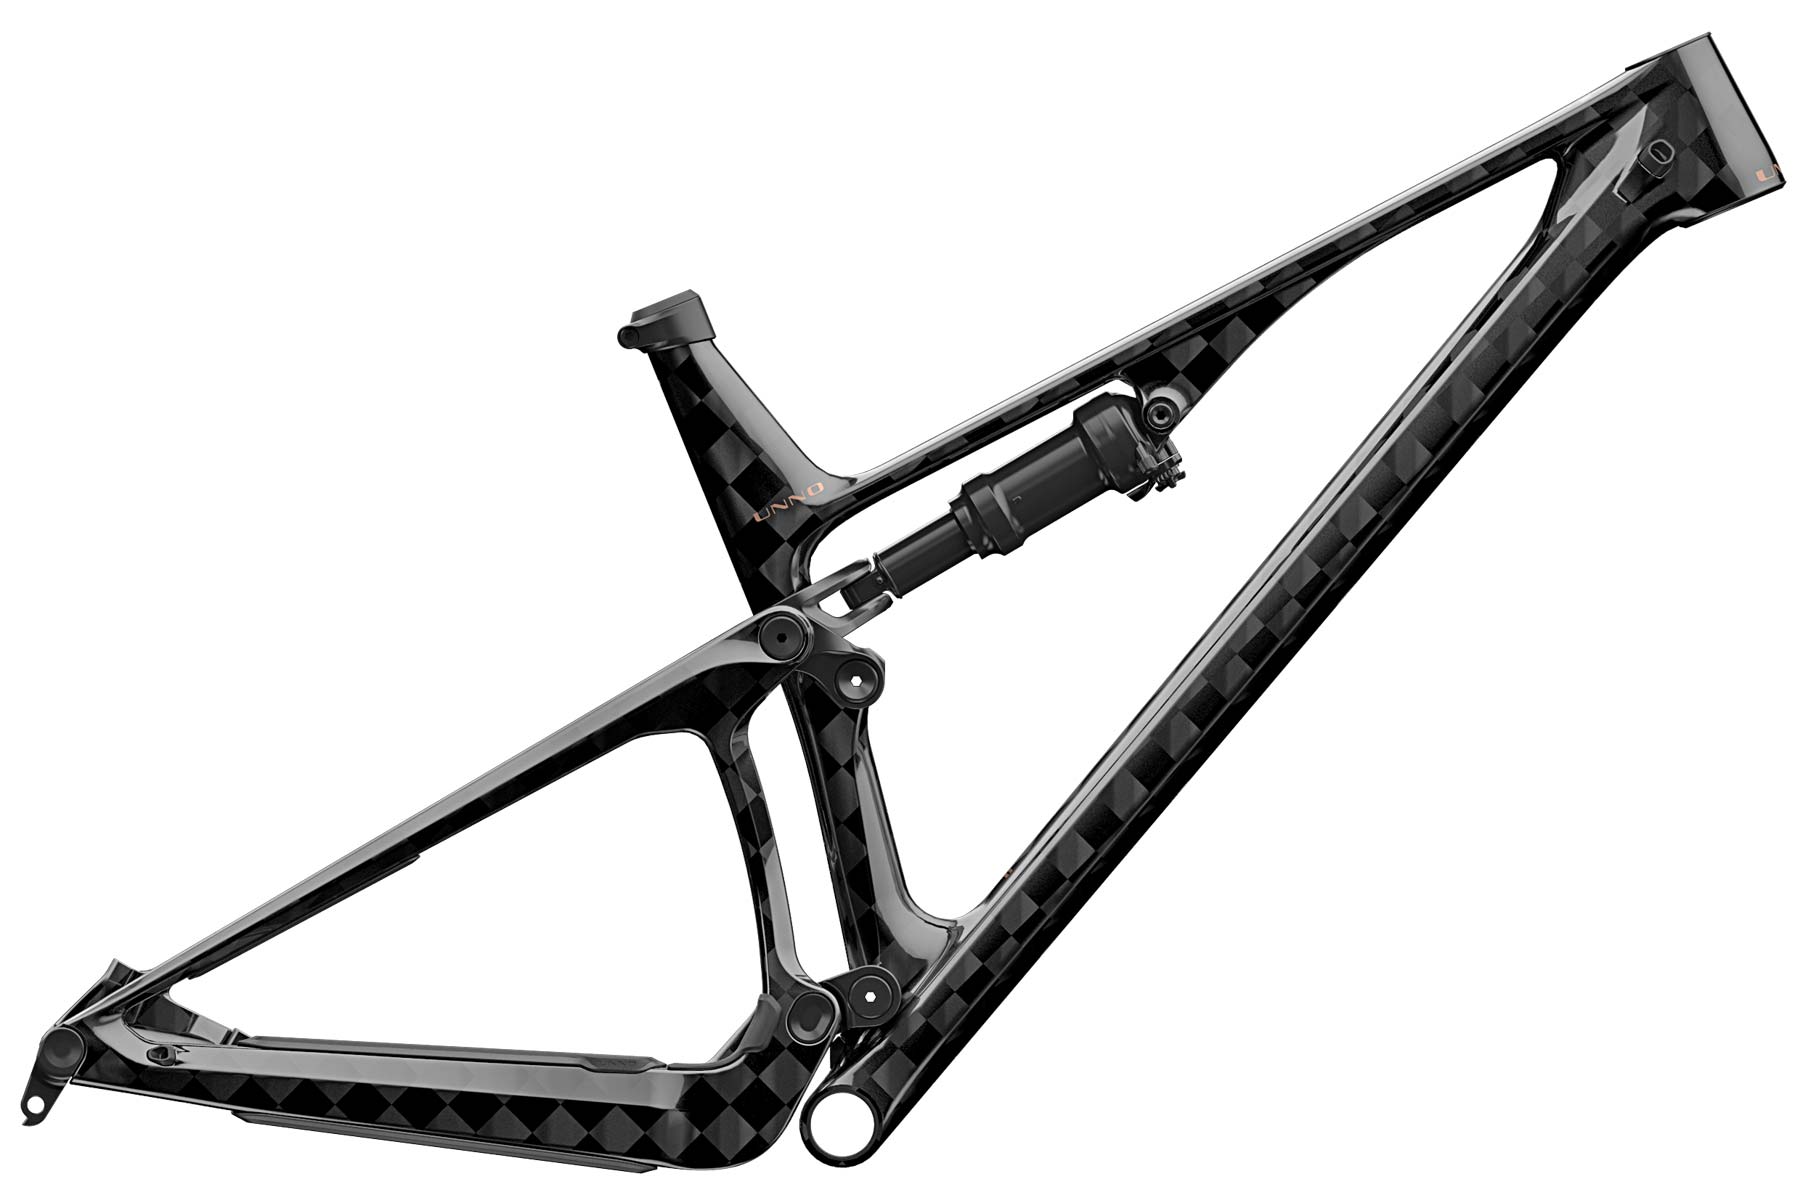 Unno Horn 100mm XC bike, limited edition lightweight carbon short-travel cross-country race mountain bike